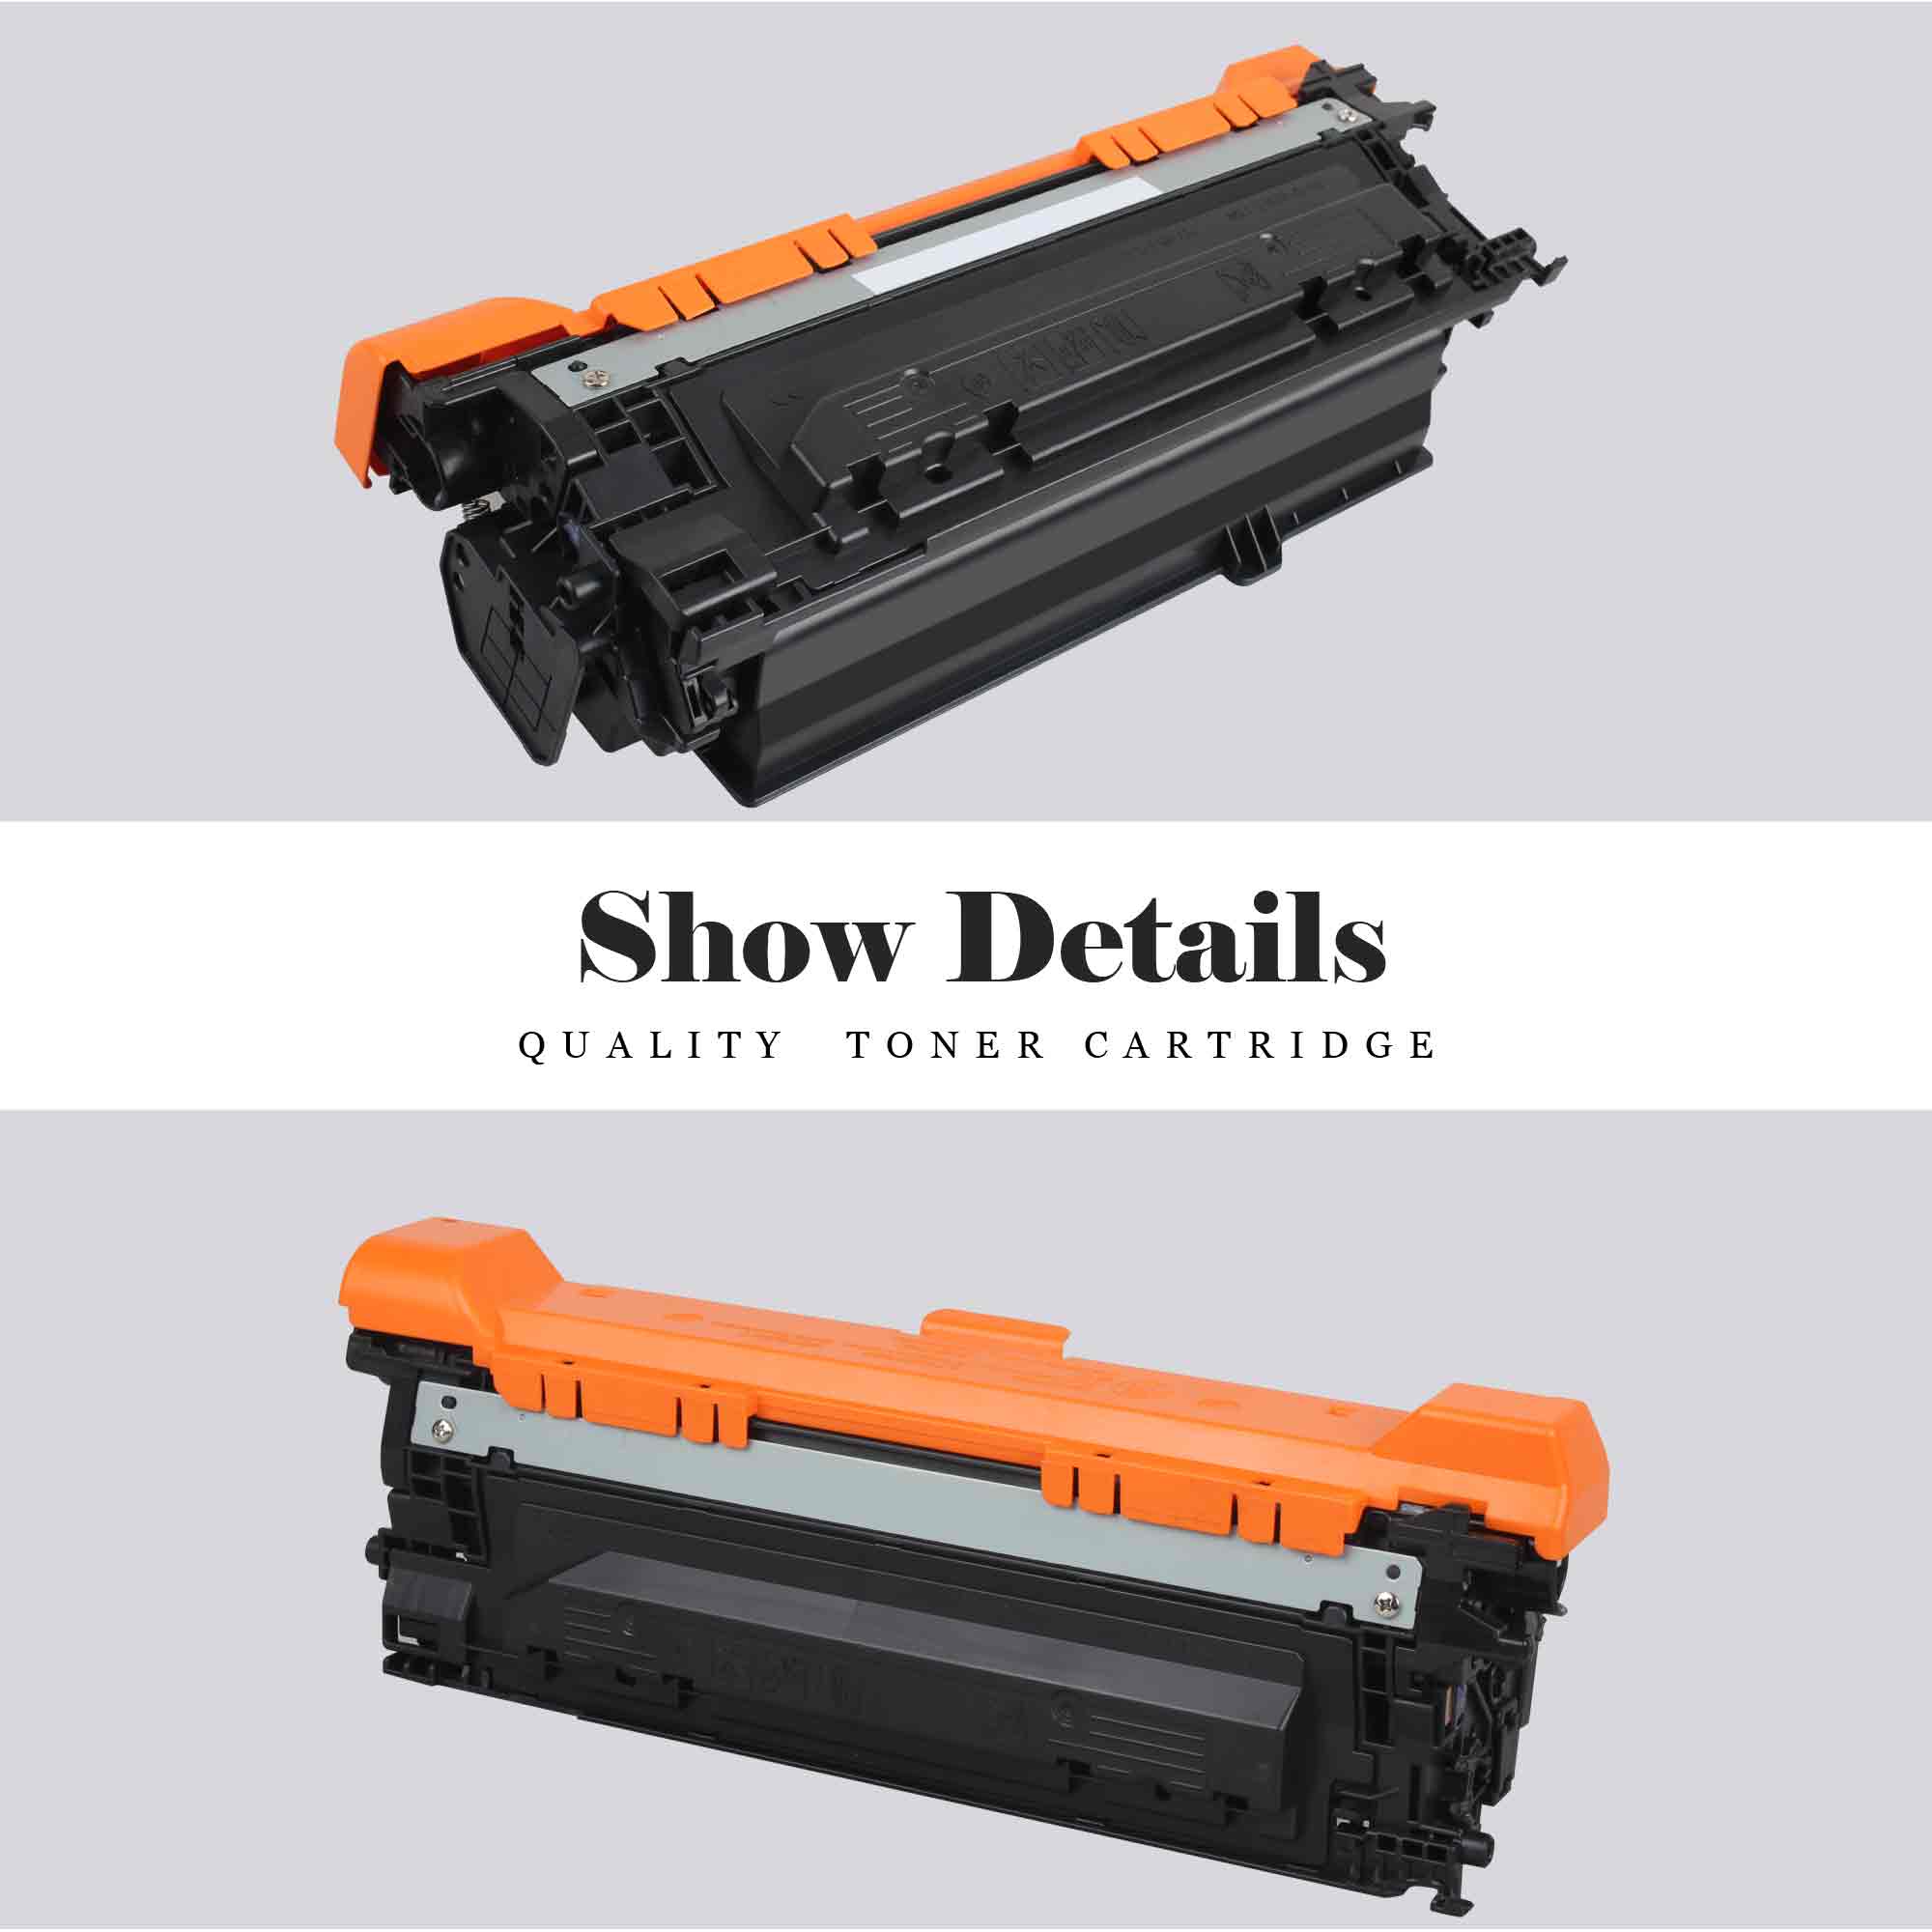 Toner H-Party Compatible Toner Cartridge for HP CE250A CE251A CE252A CE253A Color LaserJet CP3520 CP3525 CP3525X CP3525DN CP3525N CP3530, CM3530 CM3530FS (2*Black,Cyan, Magenta, Yellow,5-Pack) - image 5 of 7